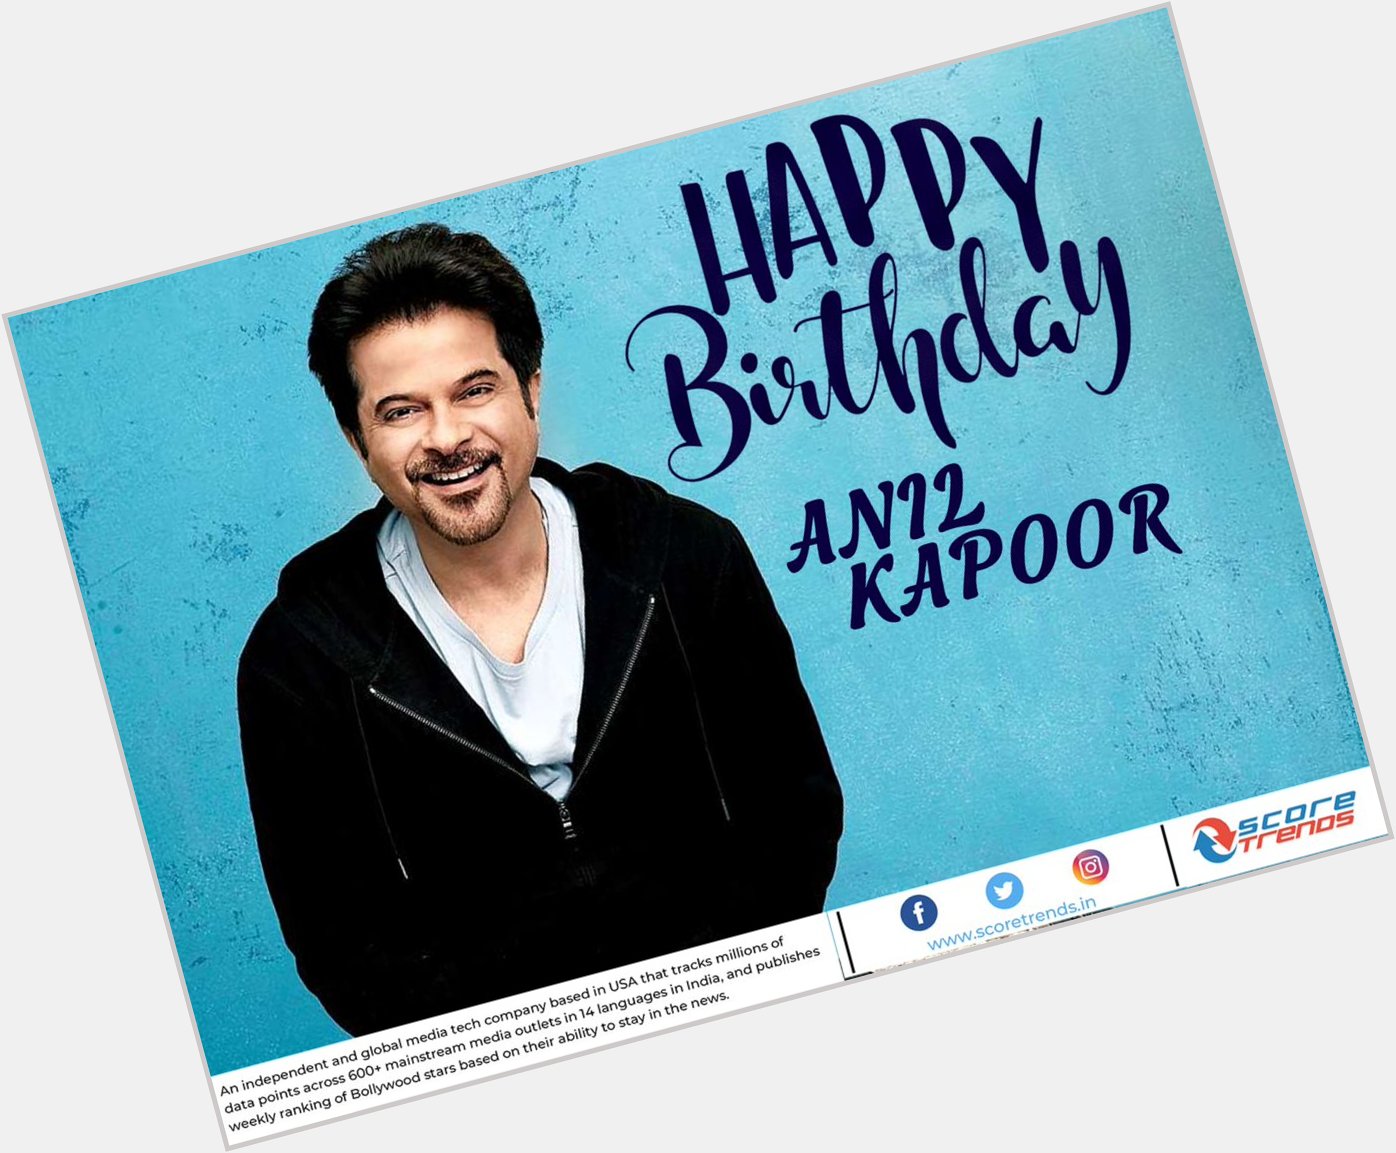 Score Trends wishes Anil Kapoor a Happy Birthday!! 